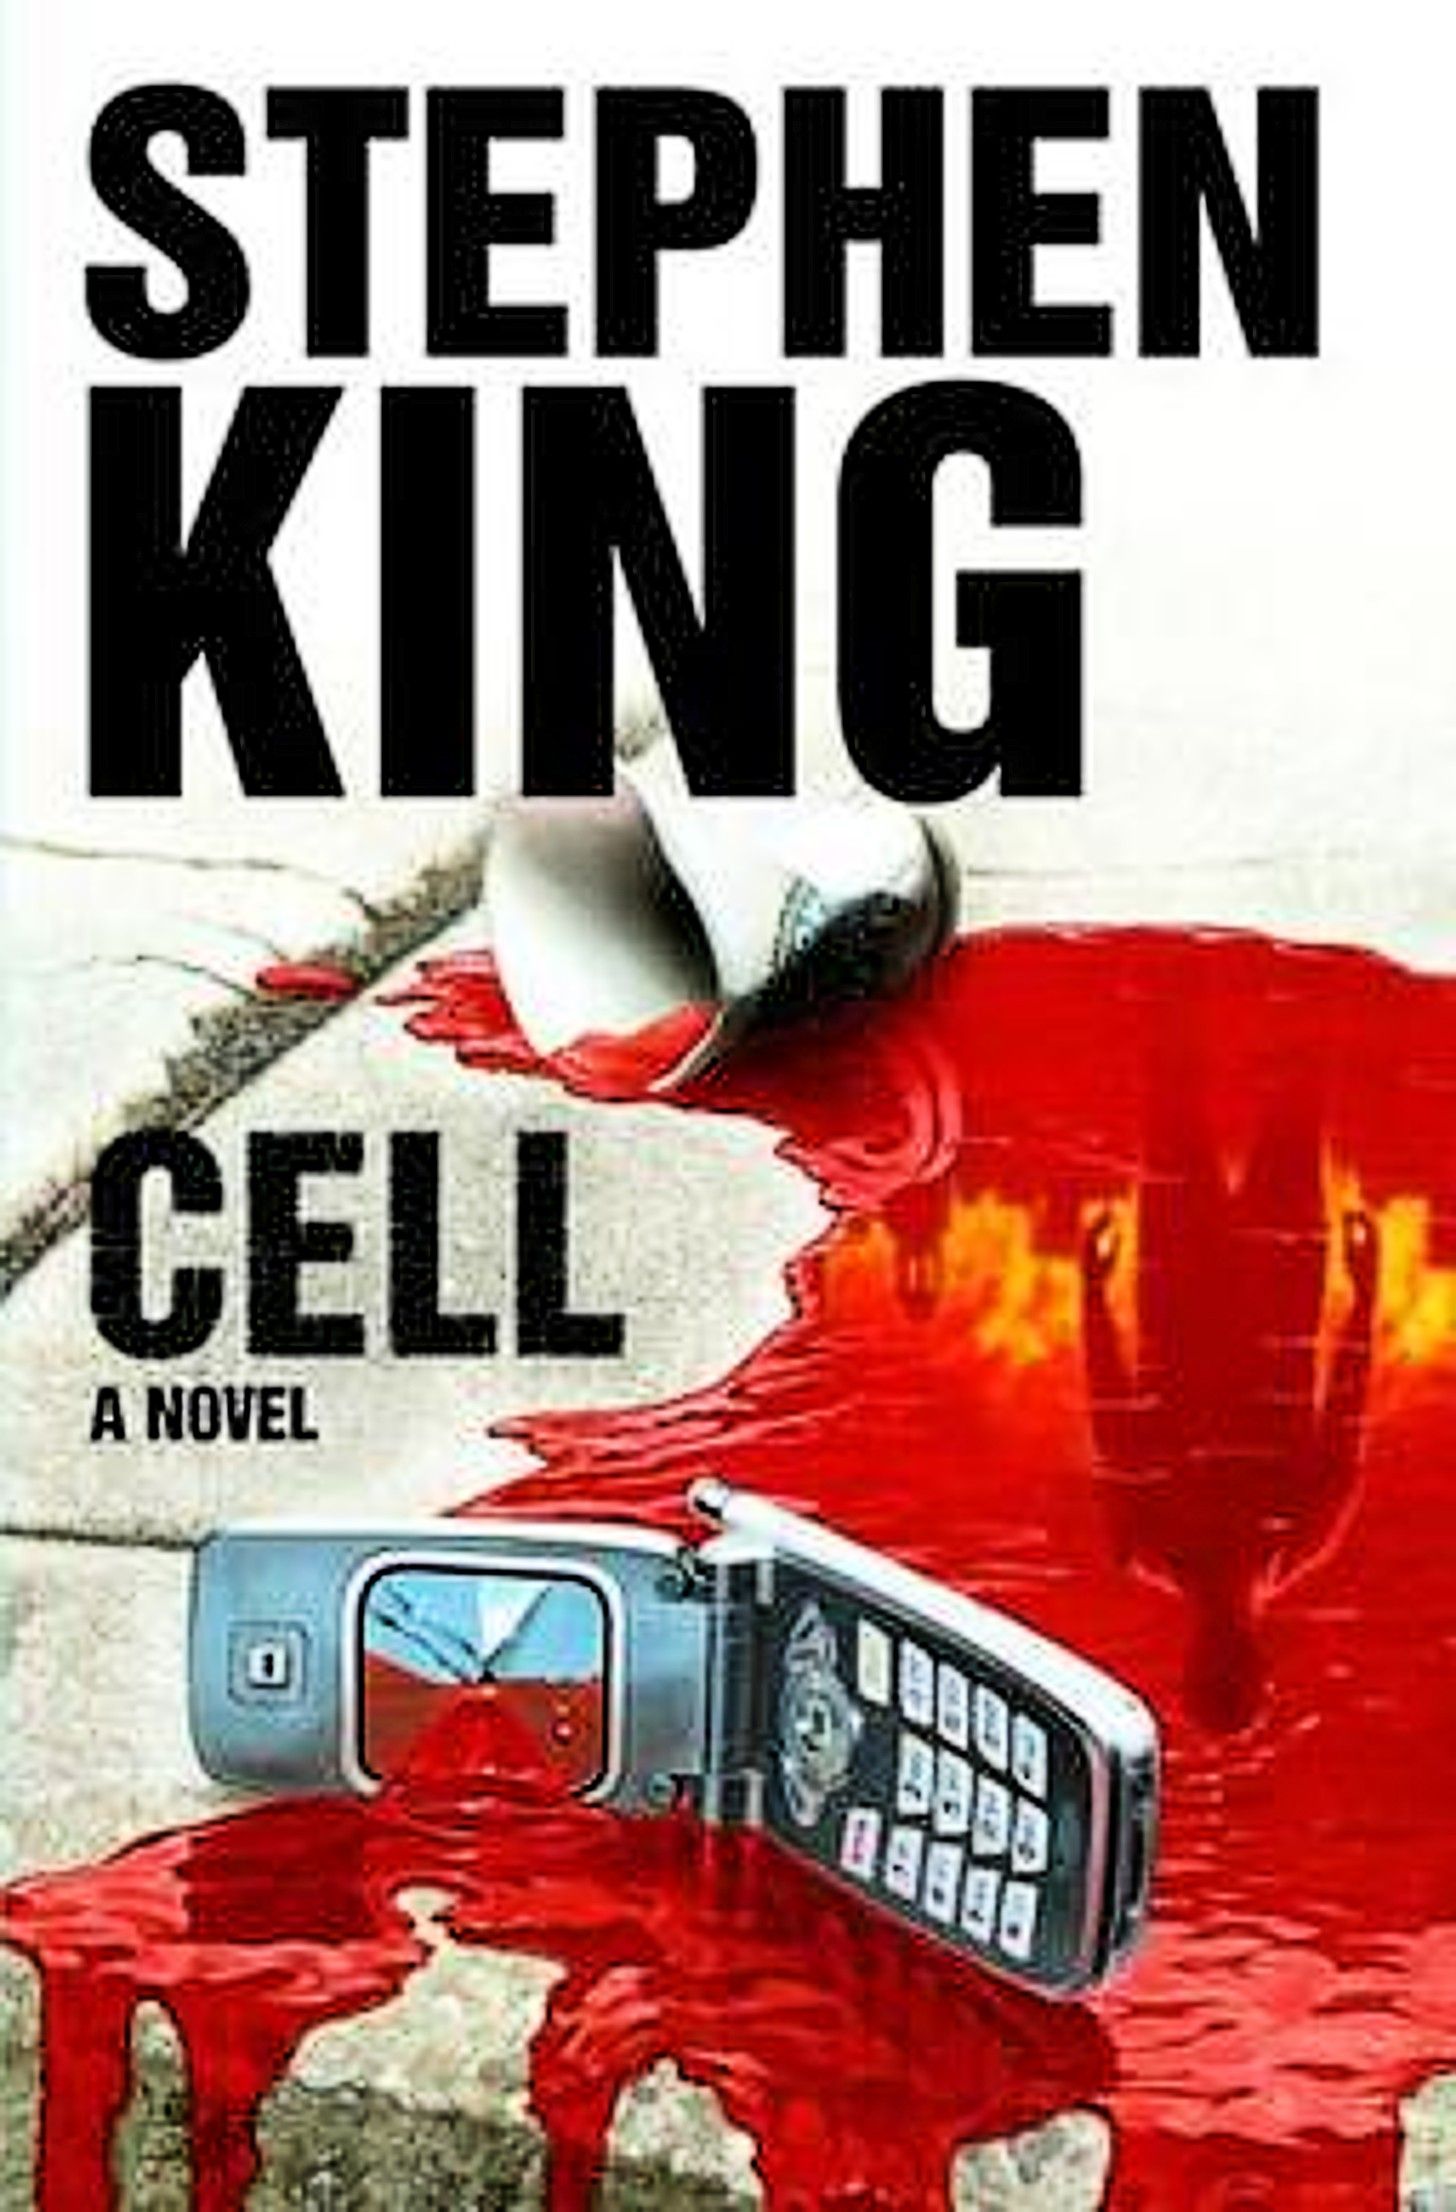 book cover for Stephen King's novel CELL, featuring a cell phone with a cracked screen lying in a pool of blood.